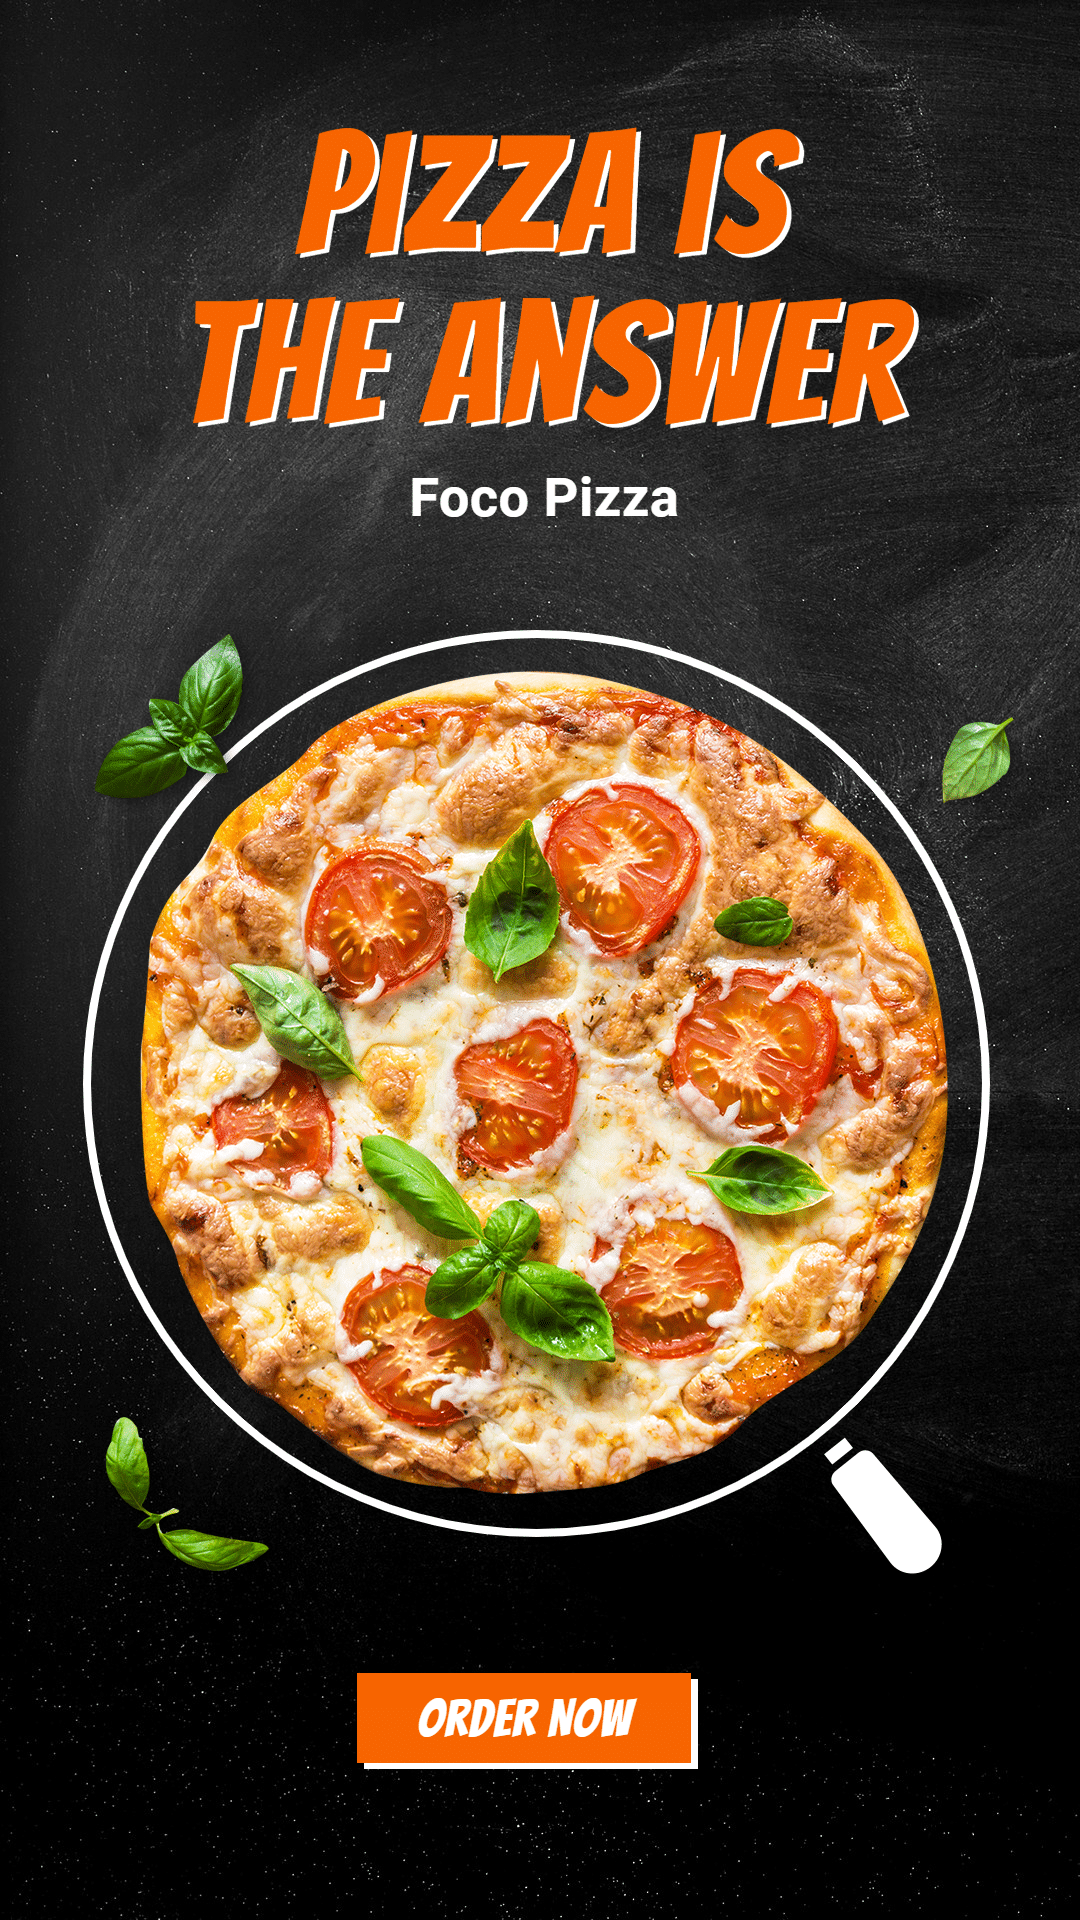 Green Leaf Surround Creative Pizza Promotion Ecommerce Story